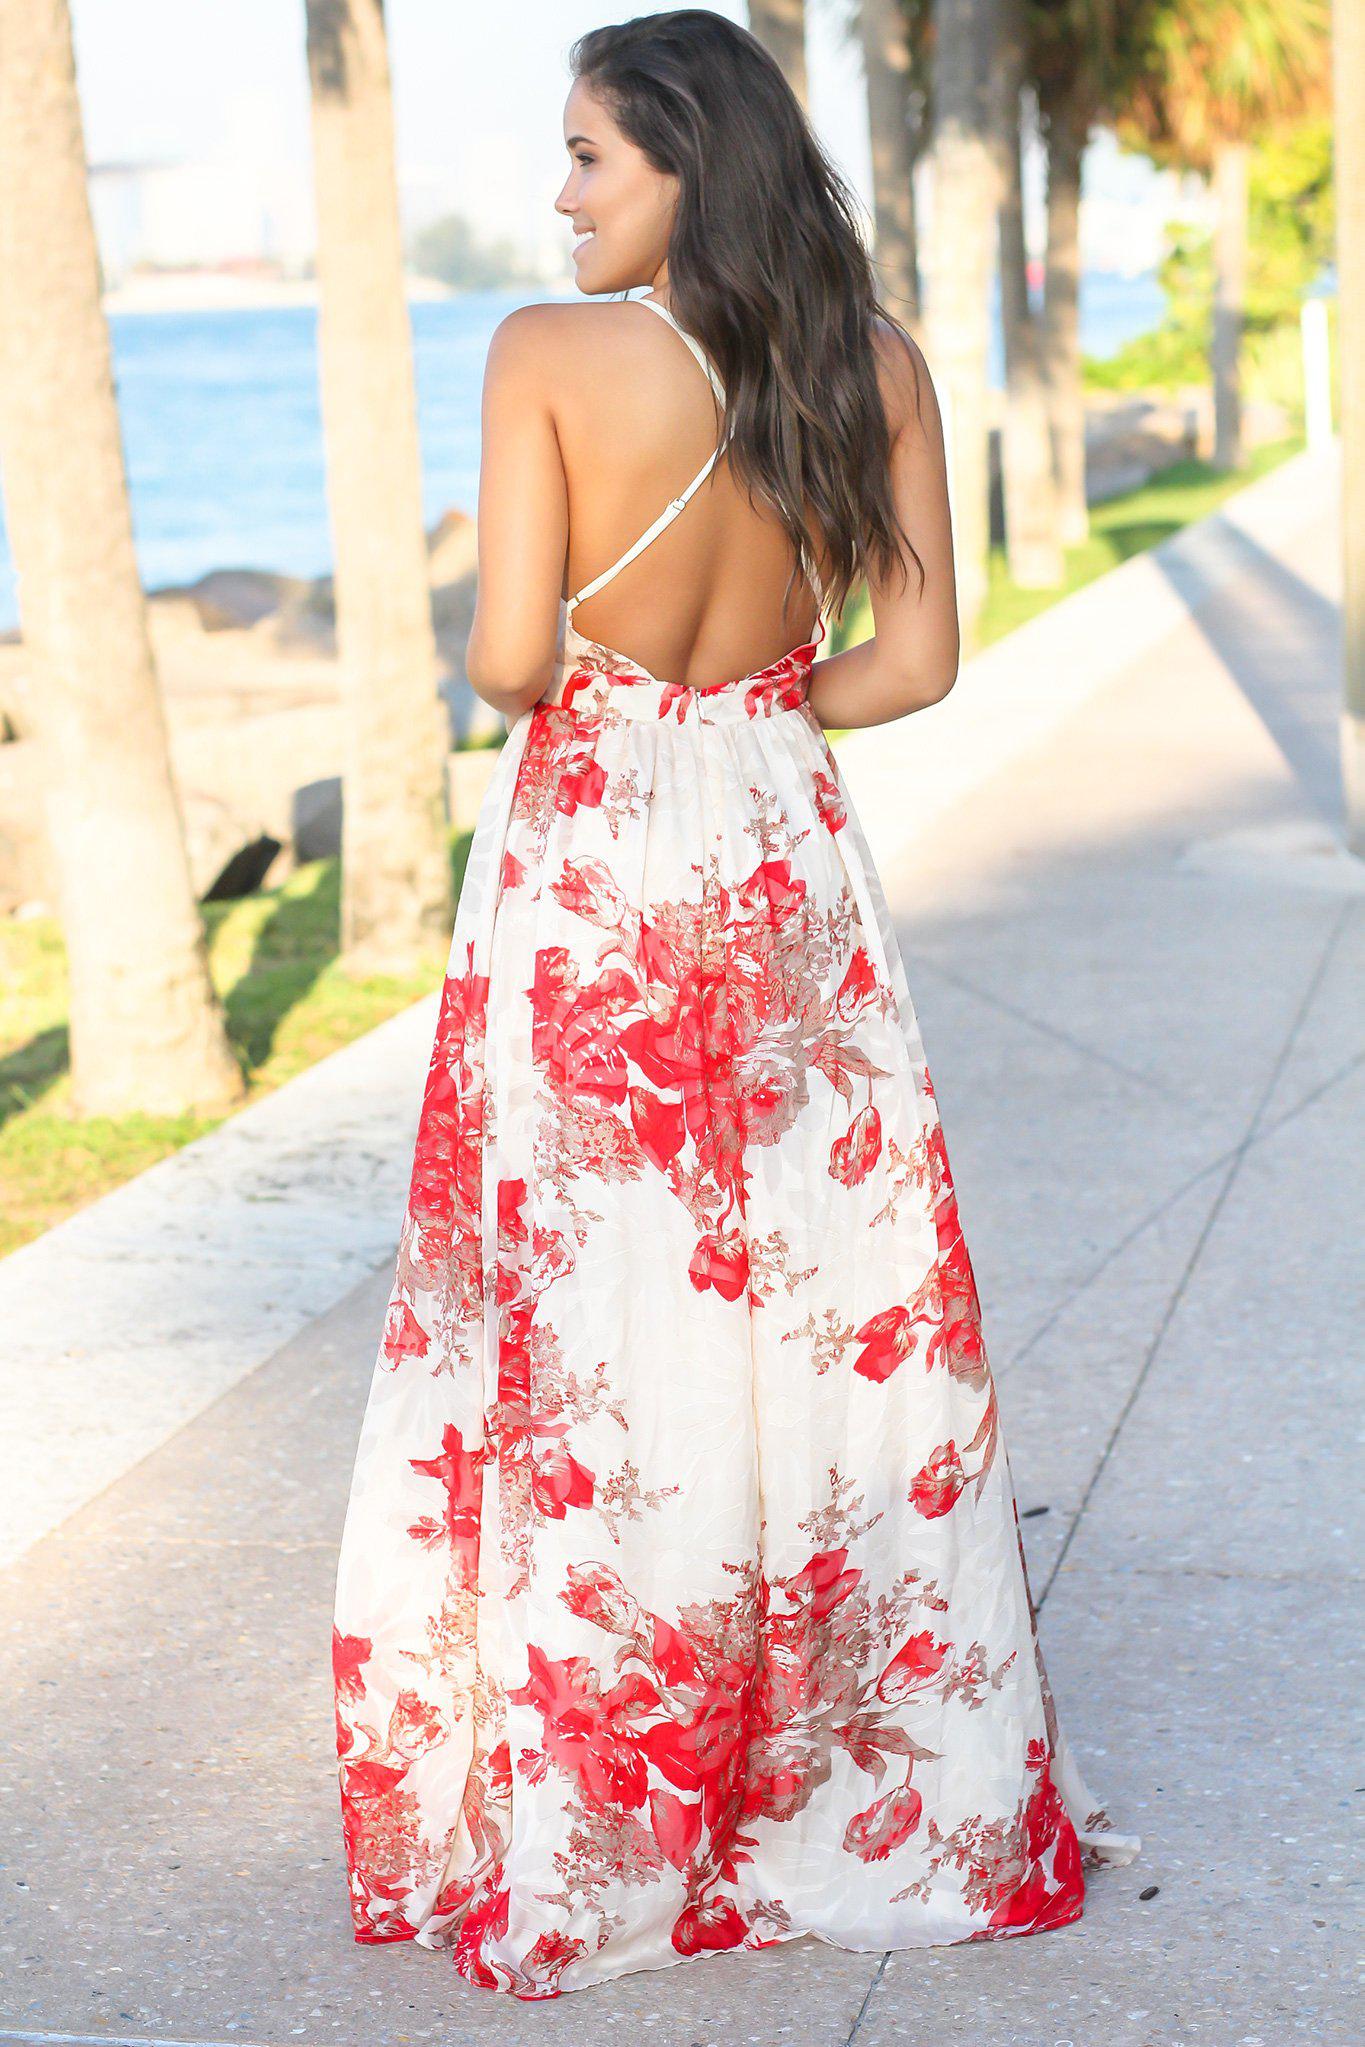 Cream and Red Floral Chiffon Maxi Dress